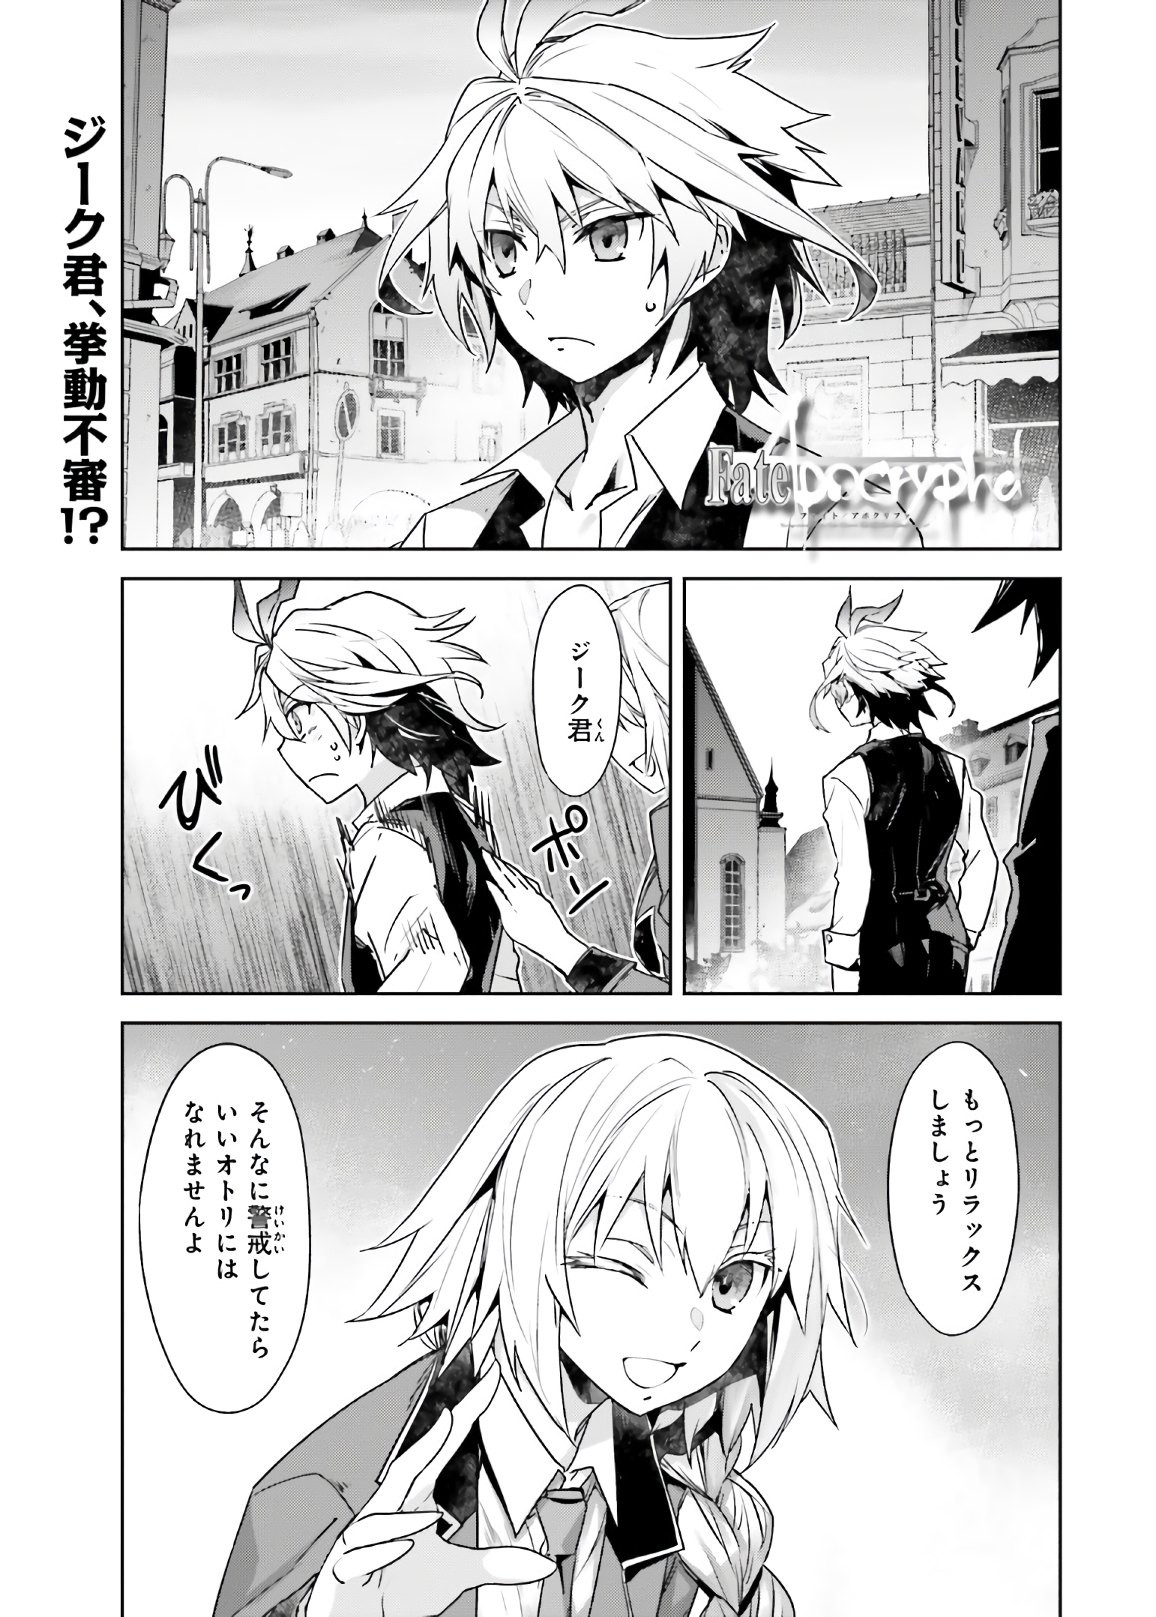 Fate-Apocrypha - Chapter 46 - Page 1